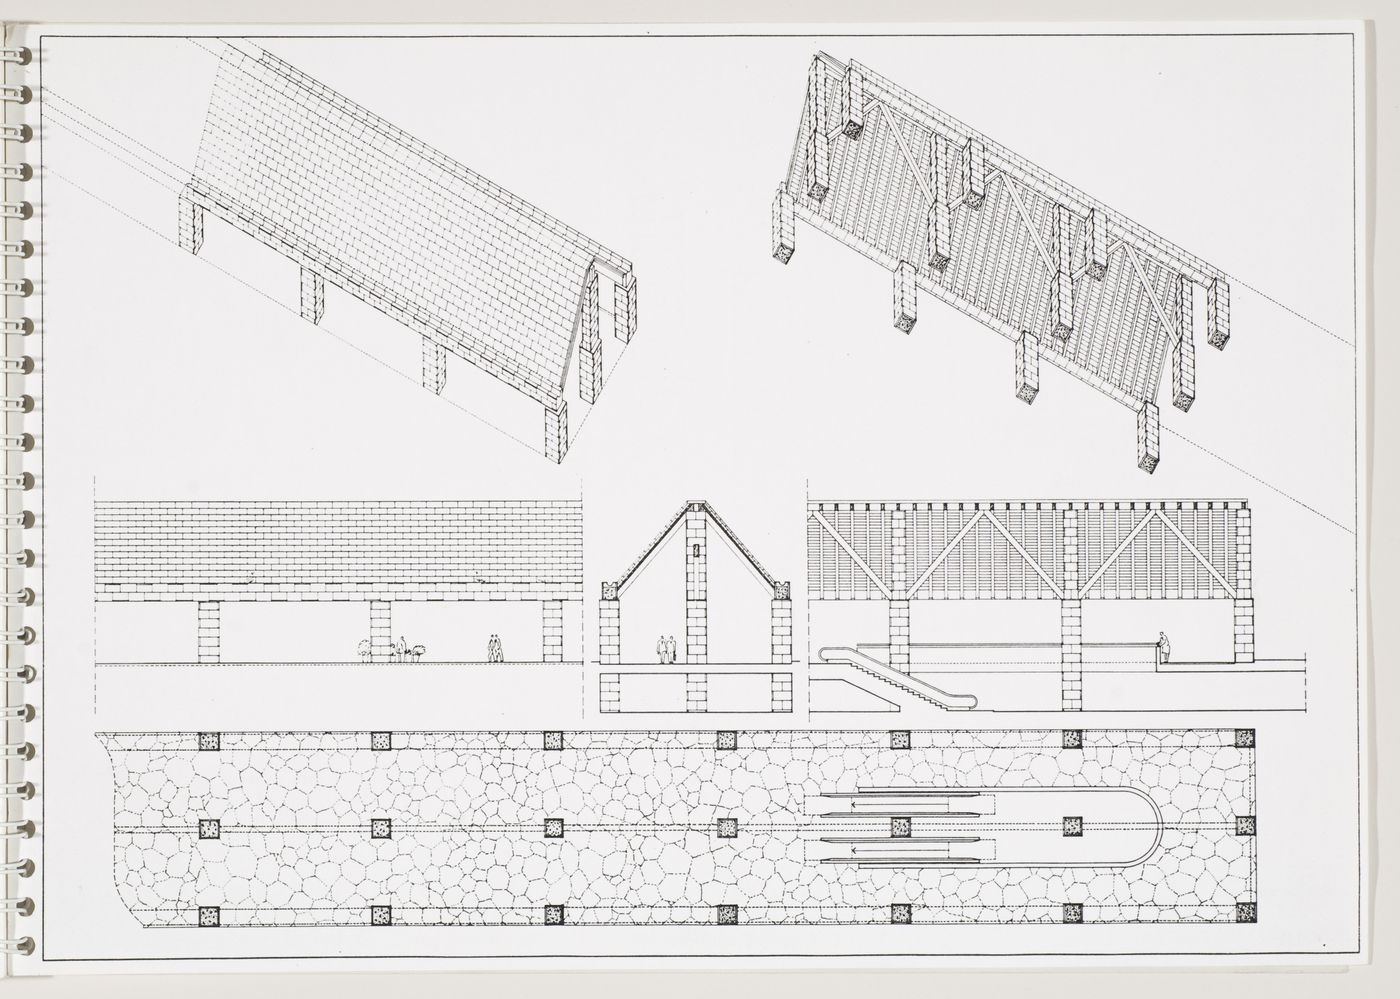 Paternoster Square, London, England: axonometrics, sections and plan for the loggia, from the architect's report
